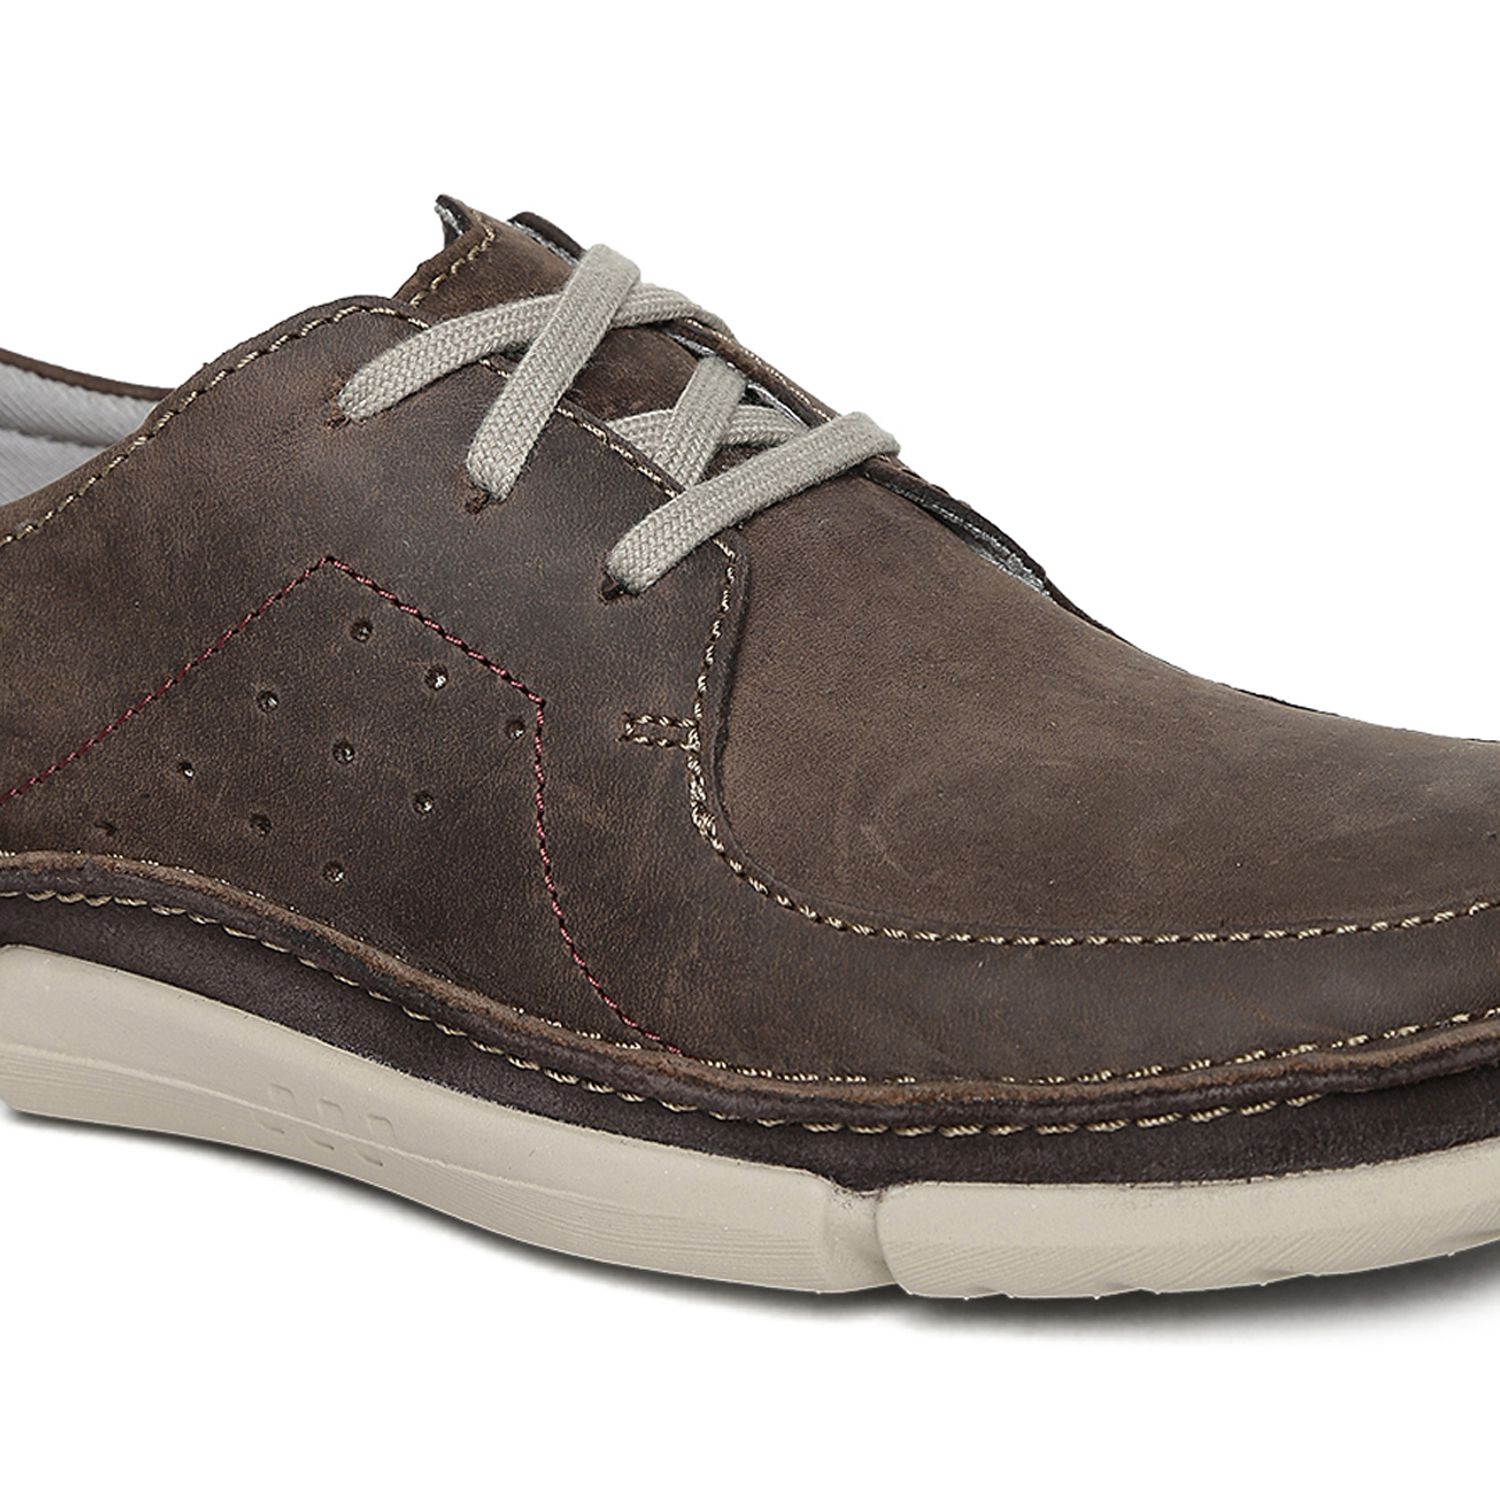 89  Clarks chilton leather derby shoes for Mens